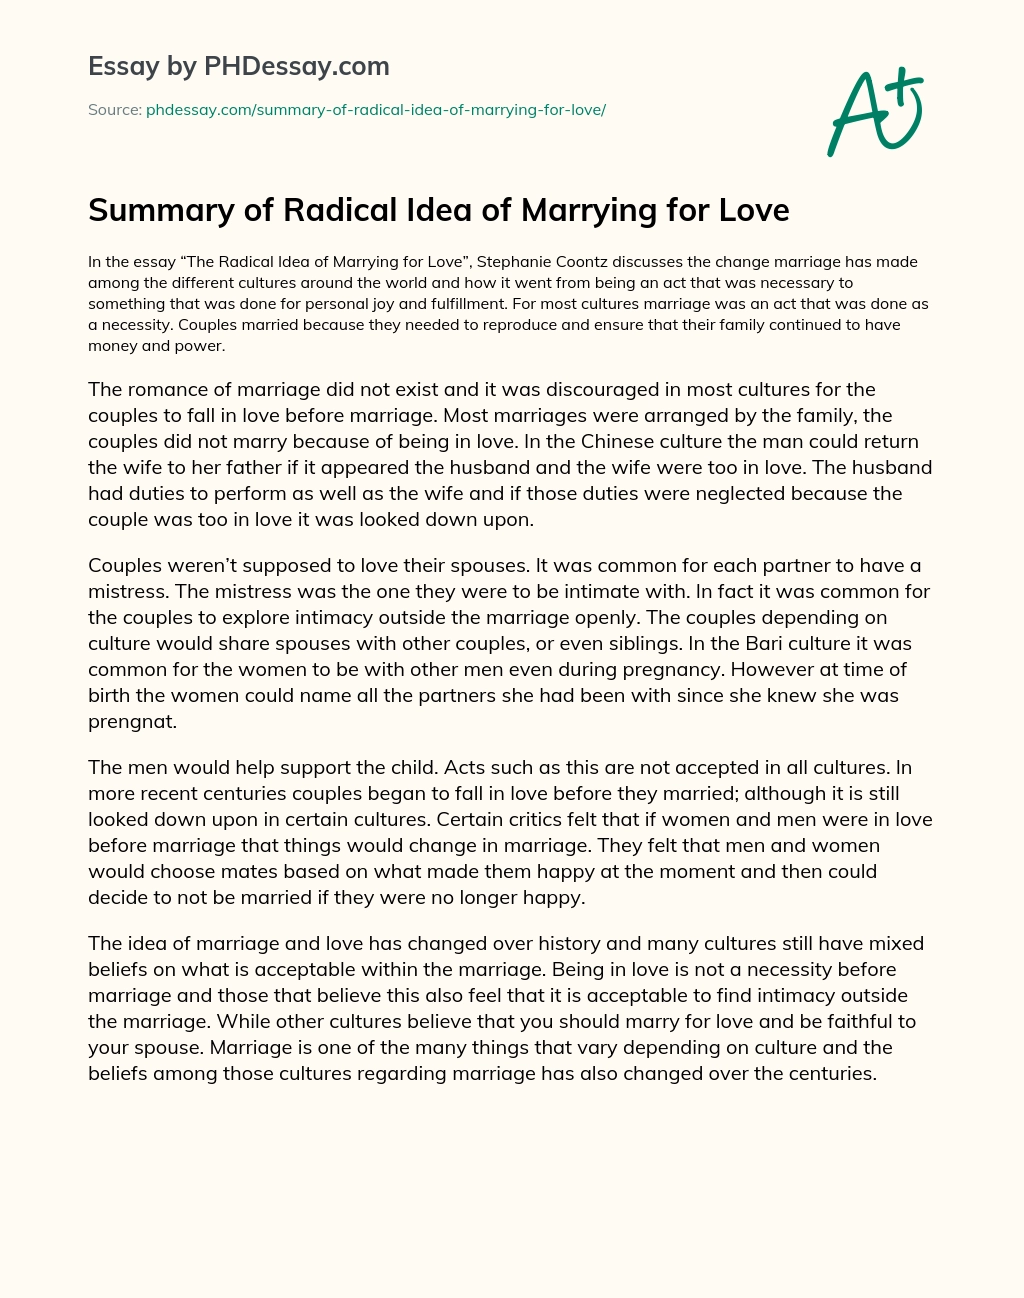 Summary of Radical Idea of Marrying for Love essay